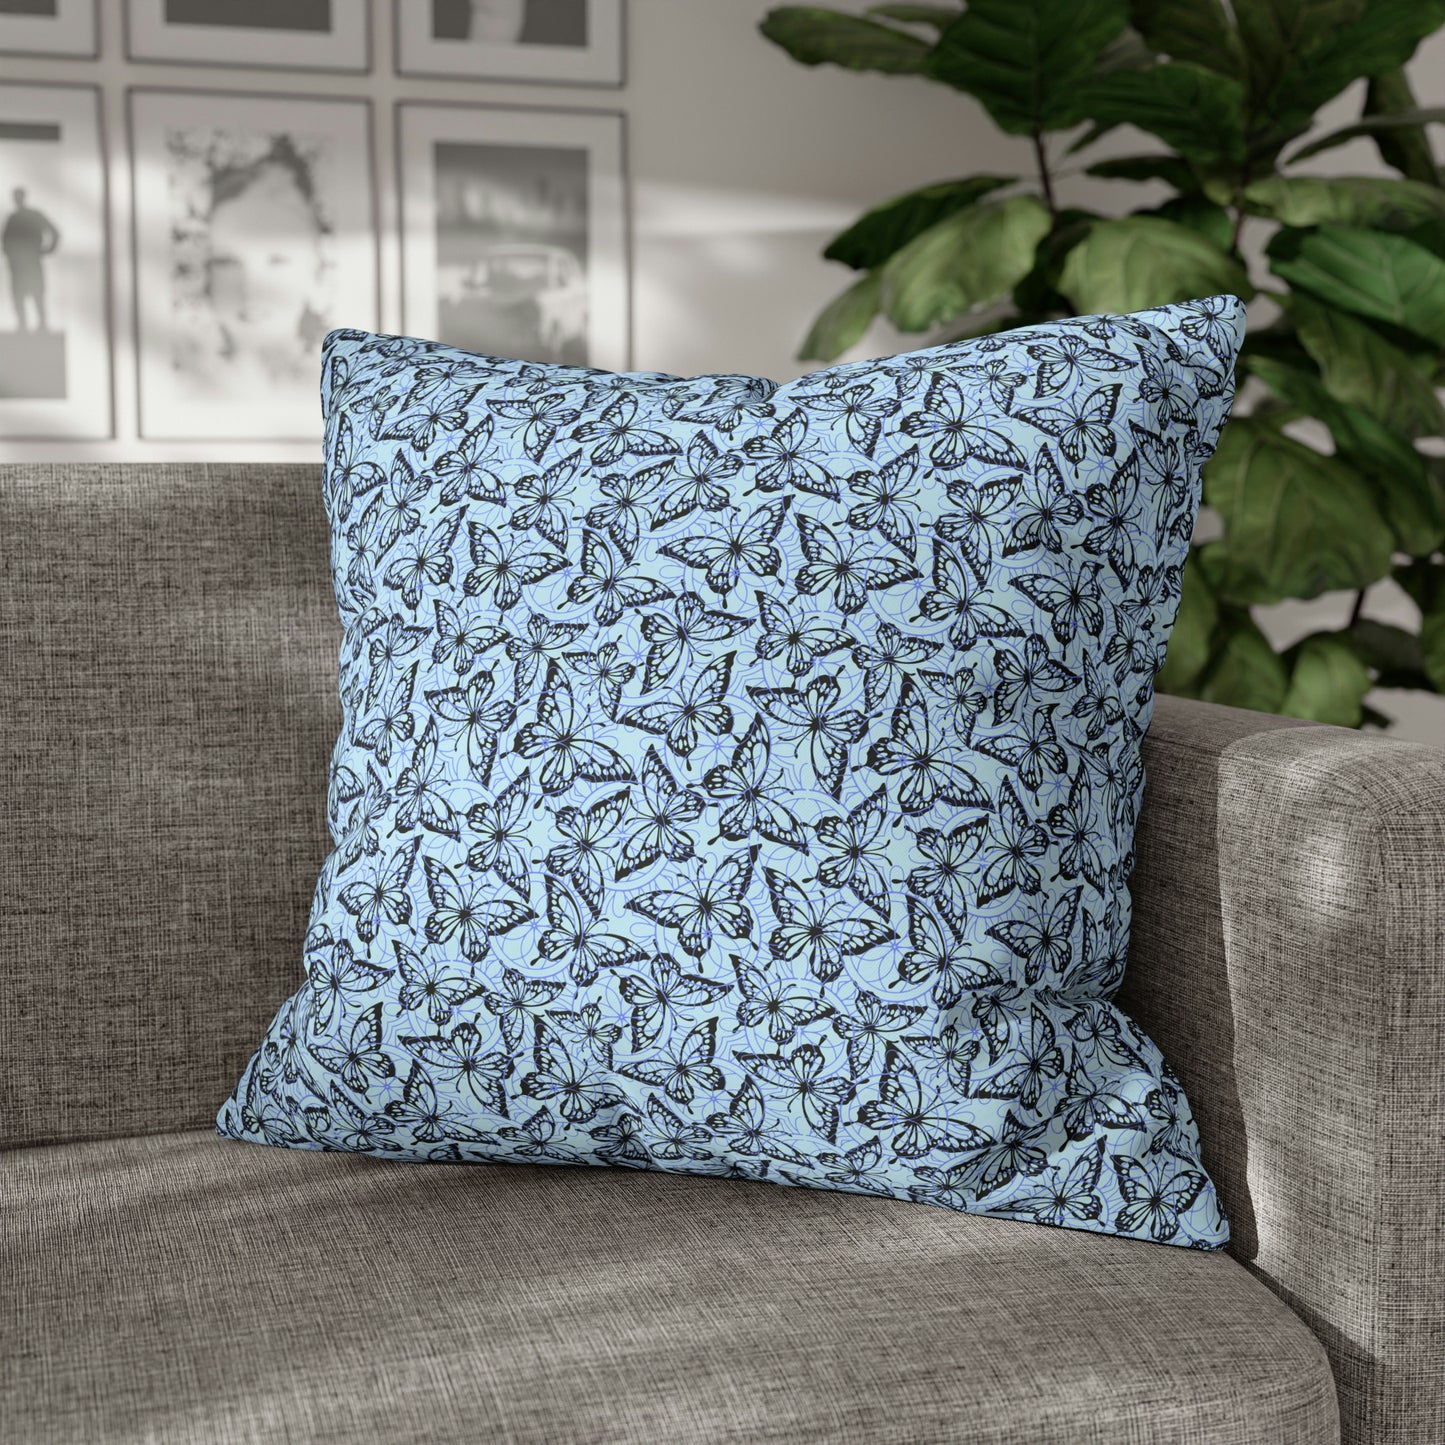 Butterfly Lace Turquoise French Botanical Art Square Poly Canvas Pillow Cover